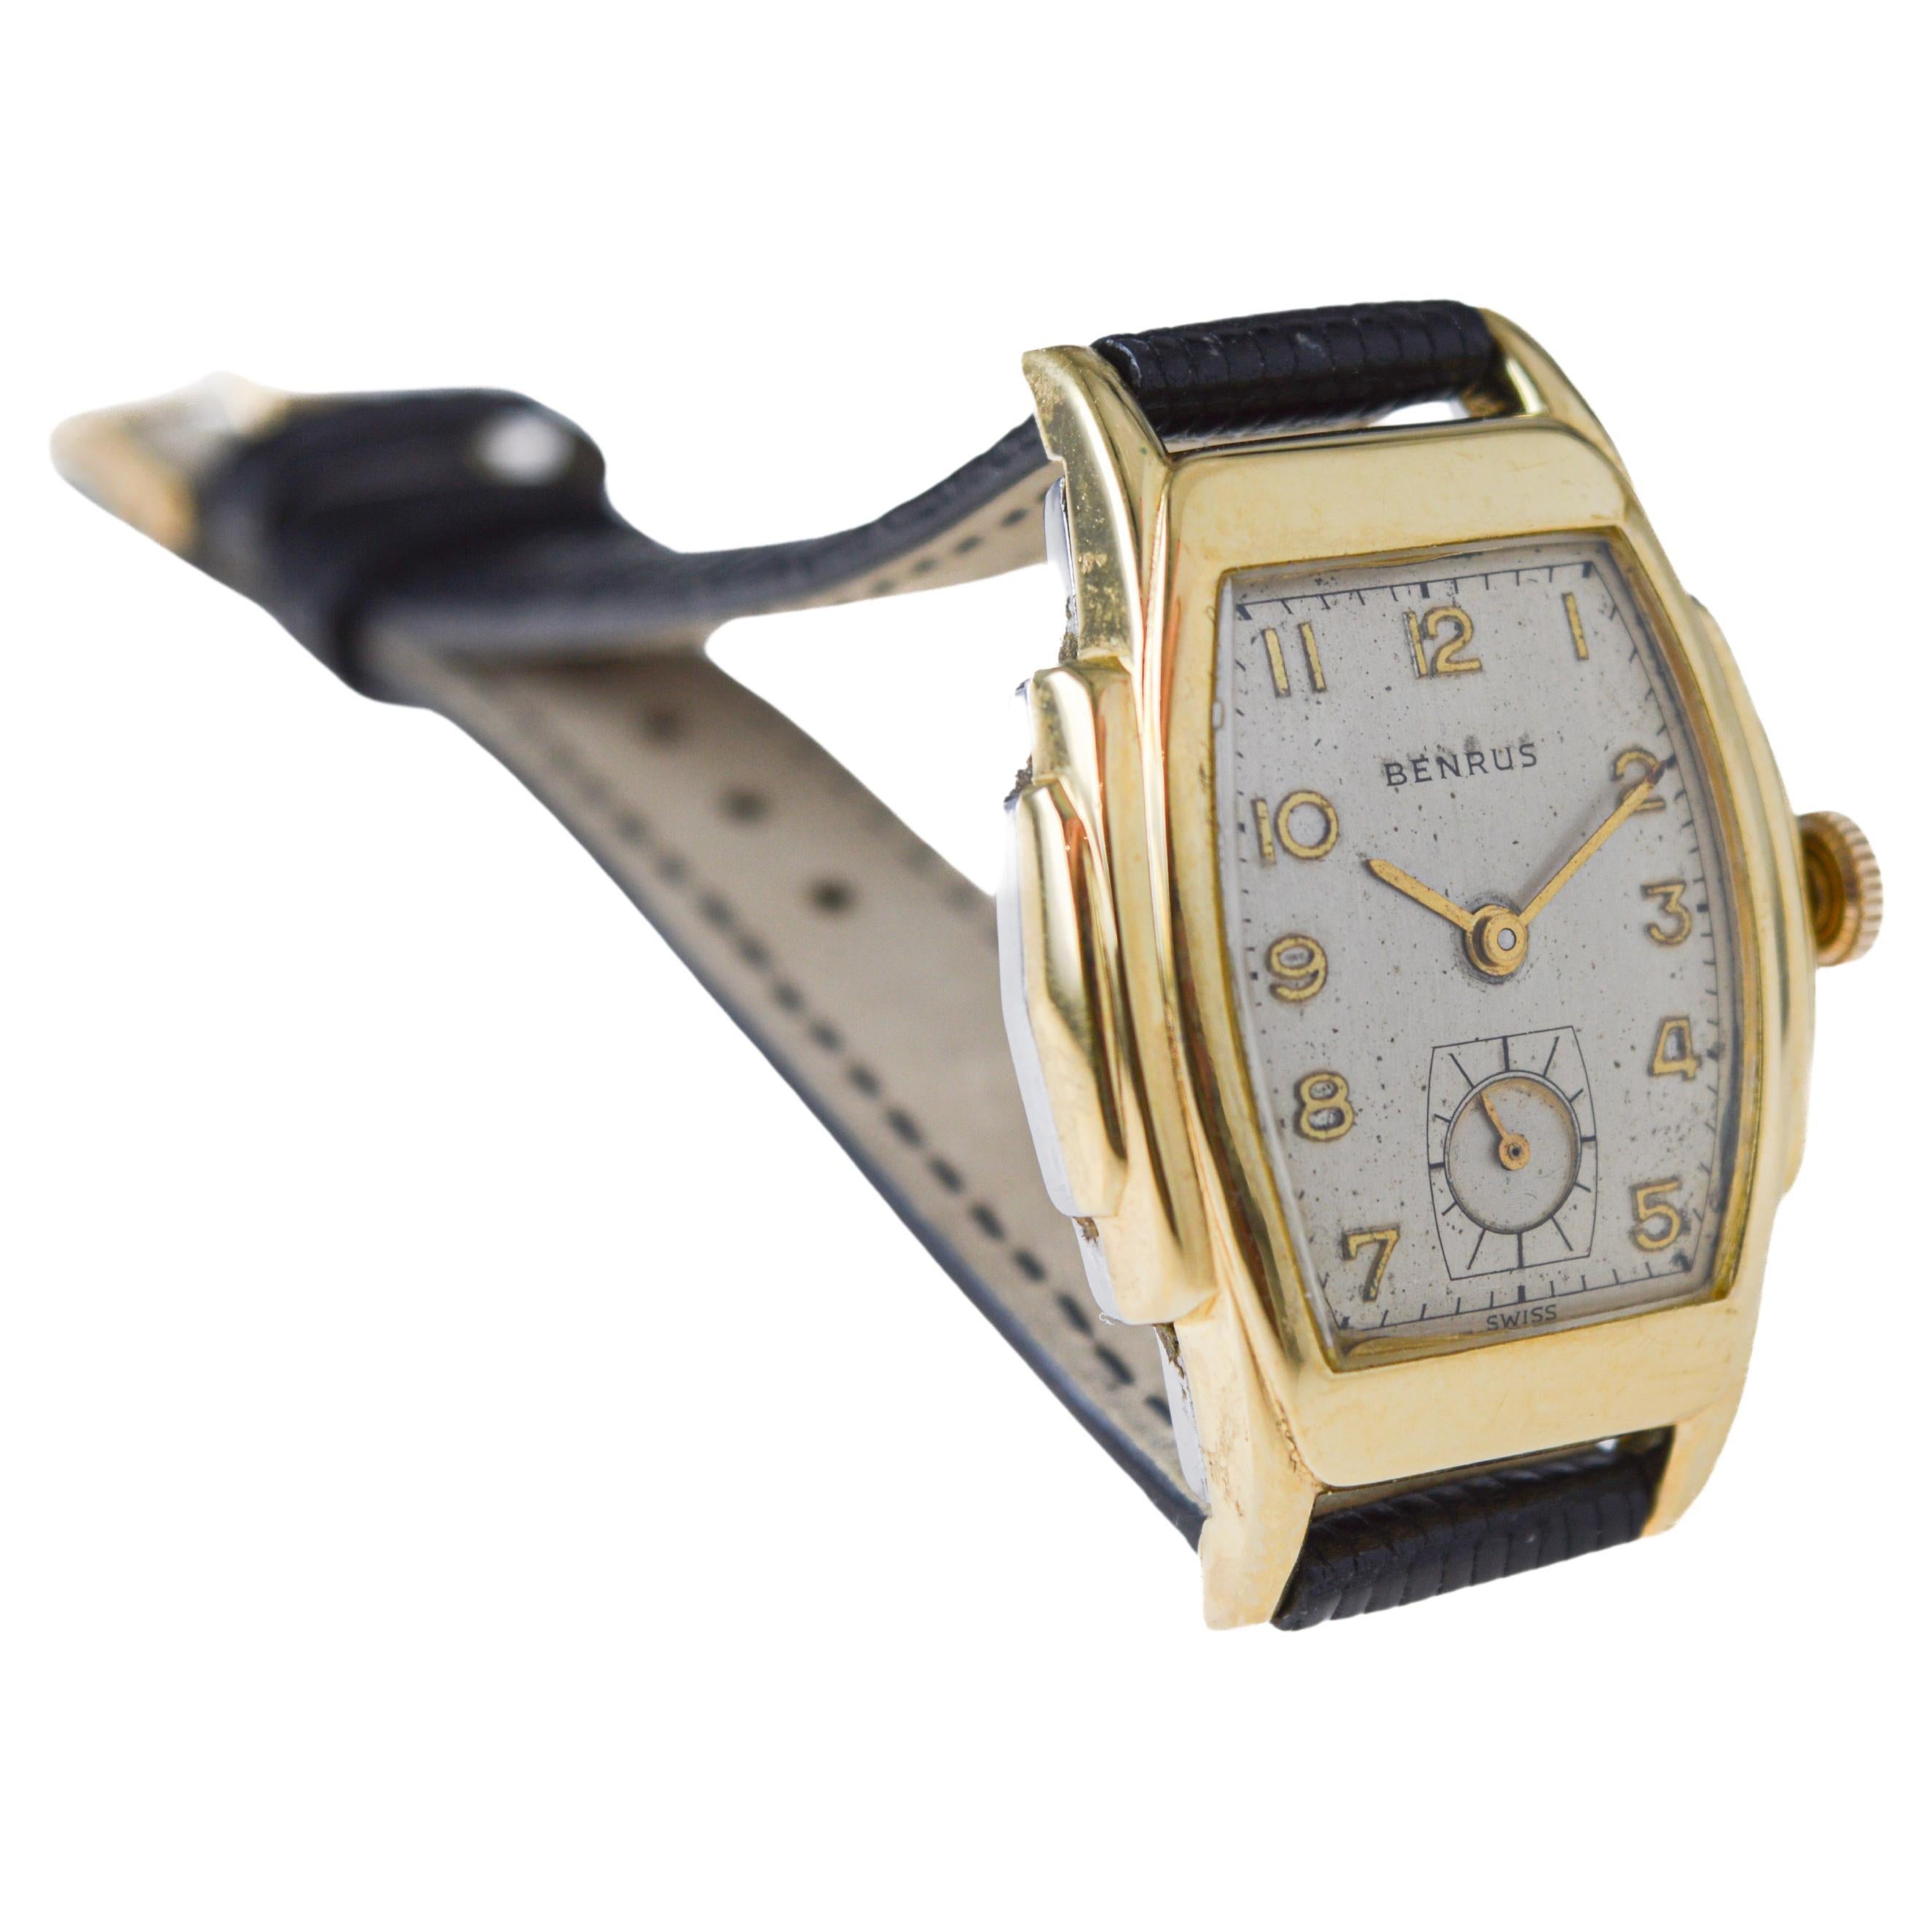 Benrus Gold-Filled Art Deco Watch circa, 1940's with Original Dial  For Sale 1